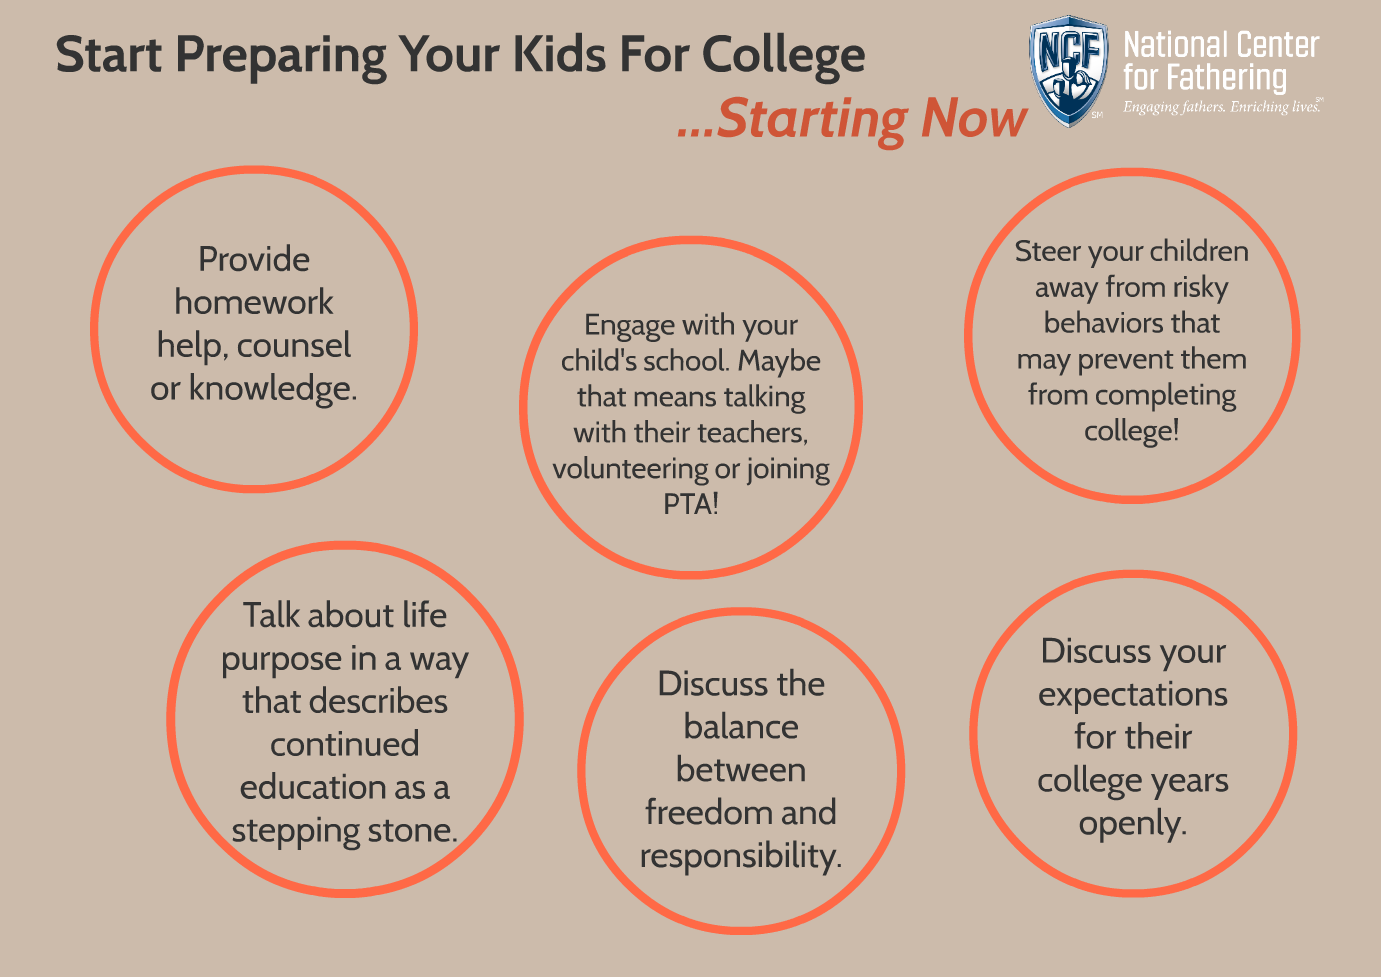 start preparing your kids for college - national center for fathering